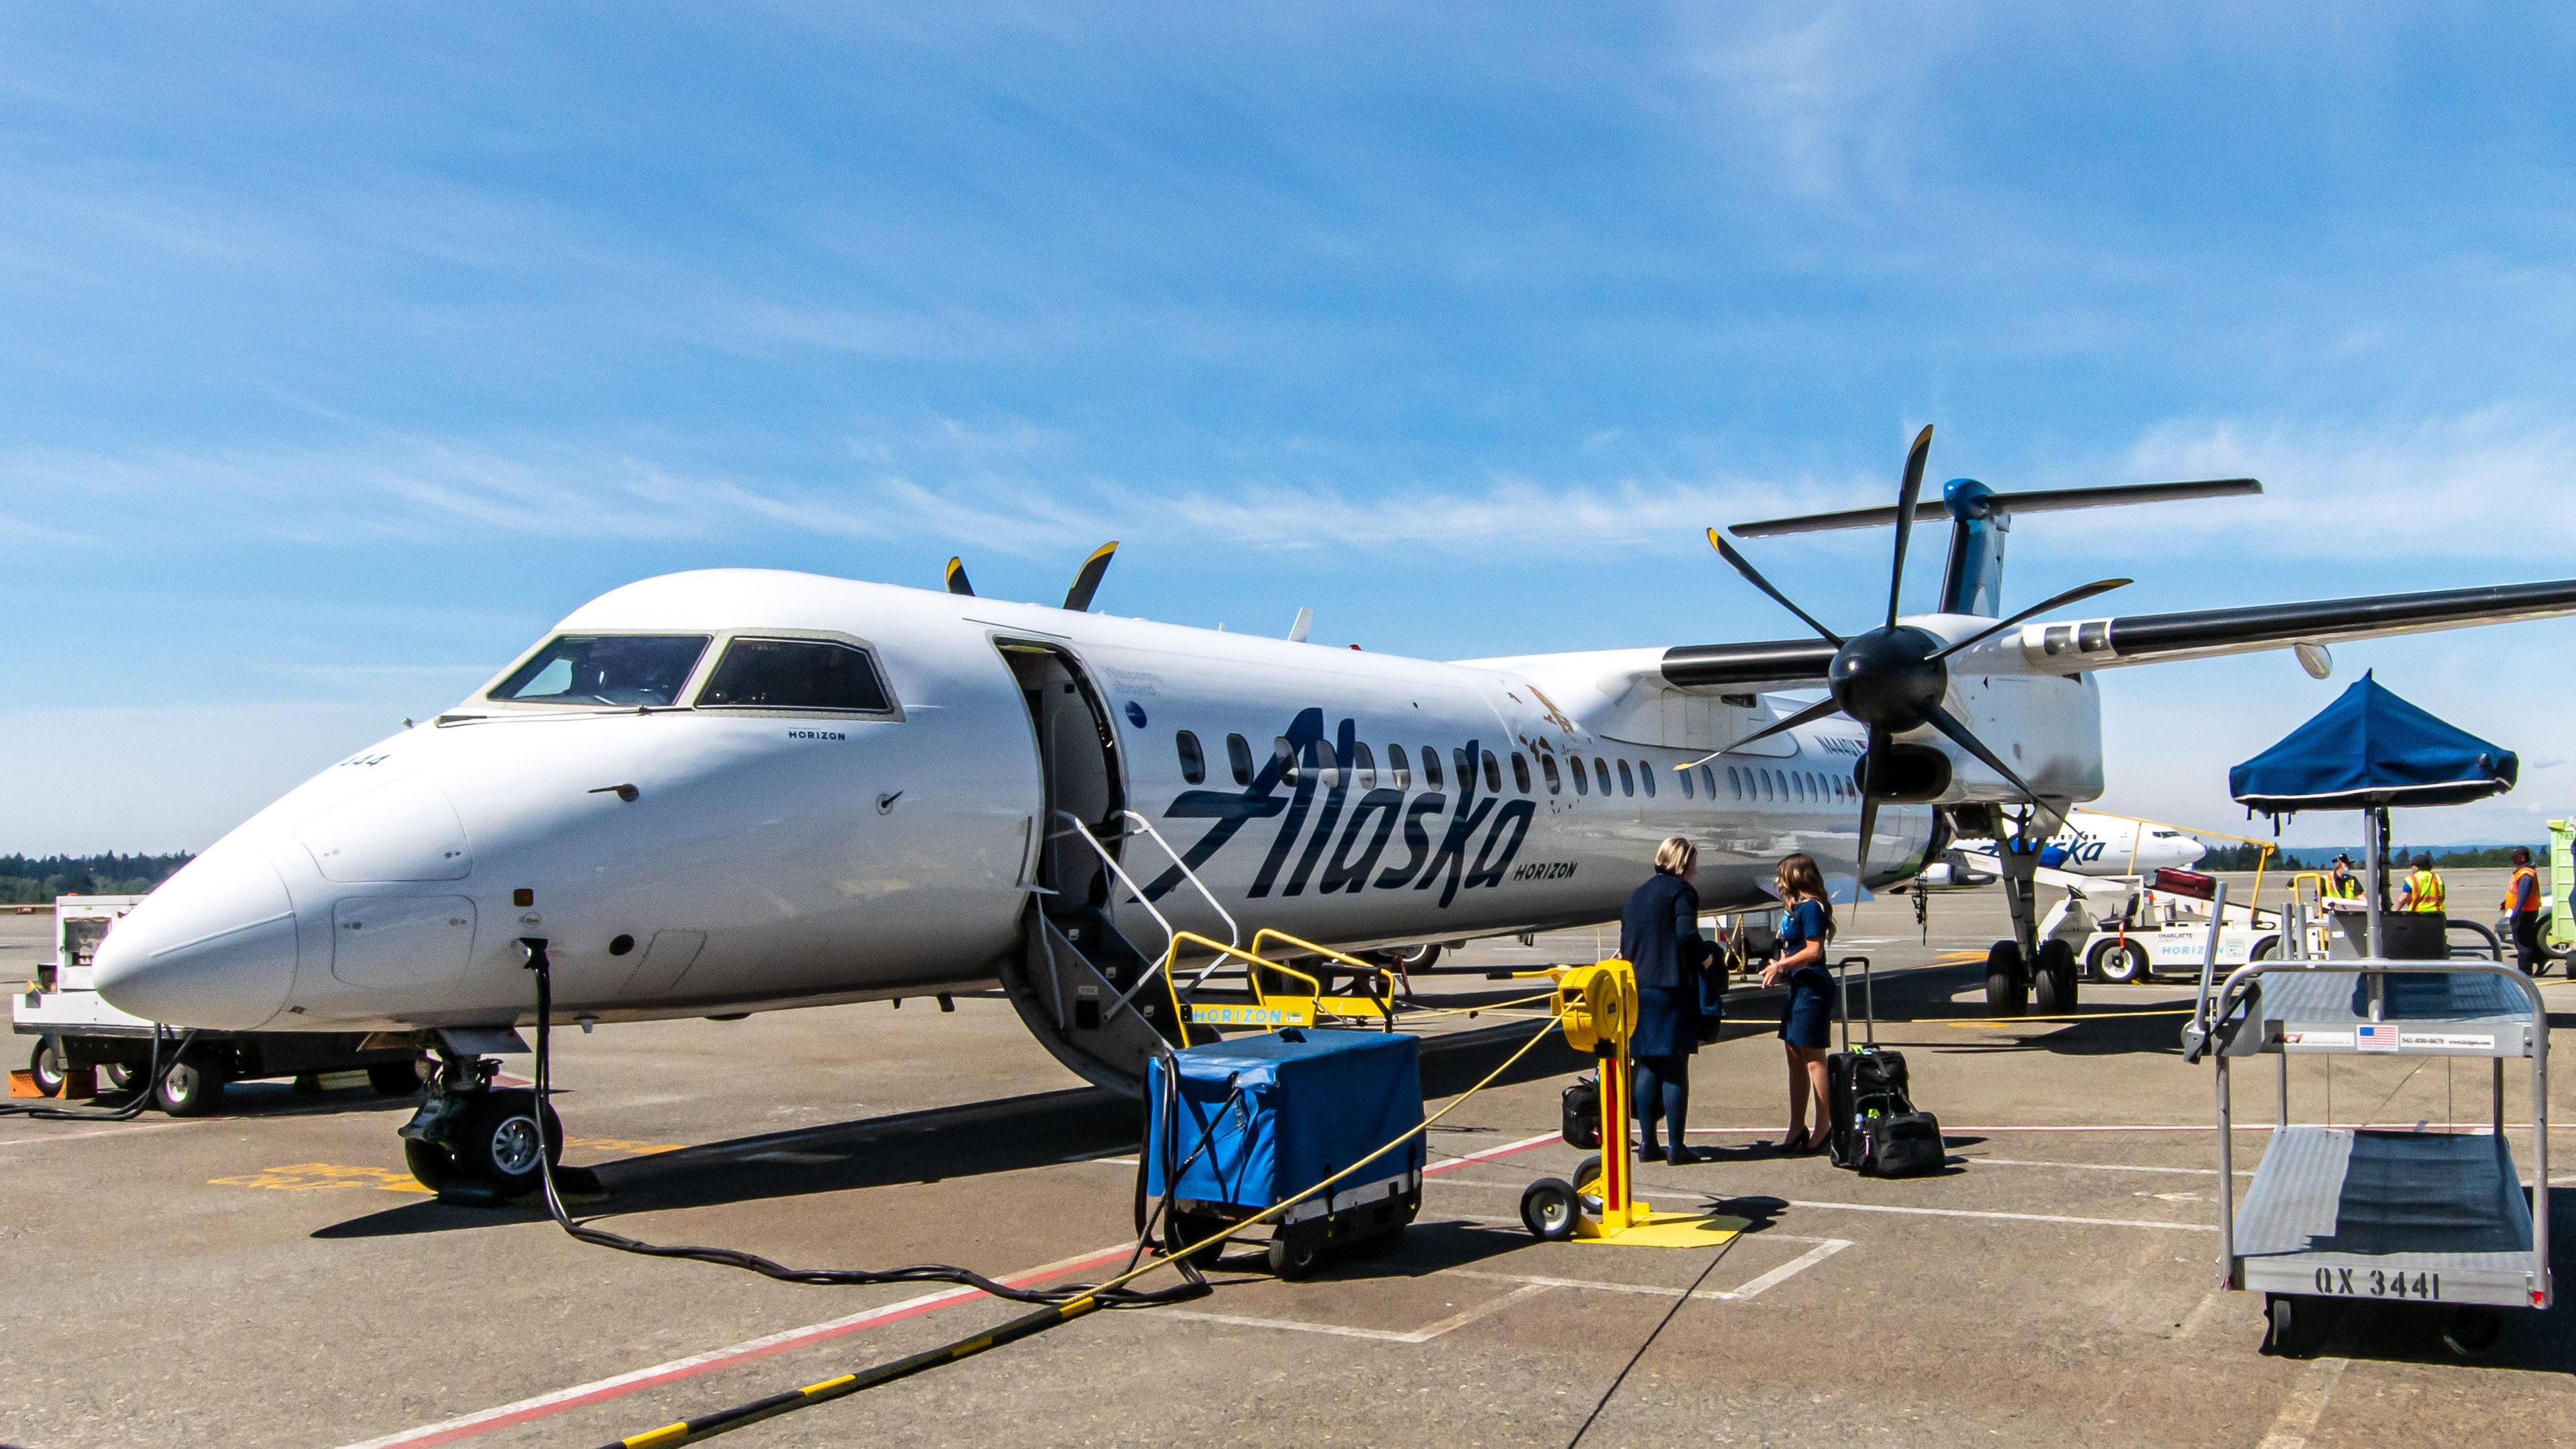 A Modern De Havilland Aircraft of Canada Dash 8 of Alaska Airlines at the SeaTac Gate in Friendly Skies with 2 Flight Attendants Briefing Each Other.  Note the A La Cart to the Right